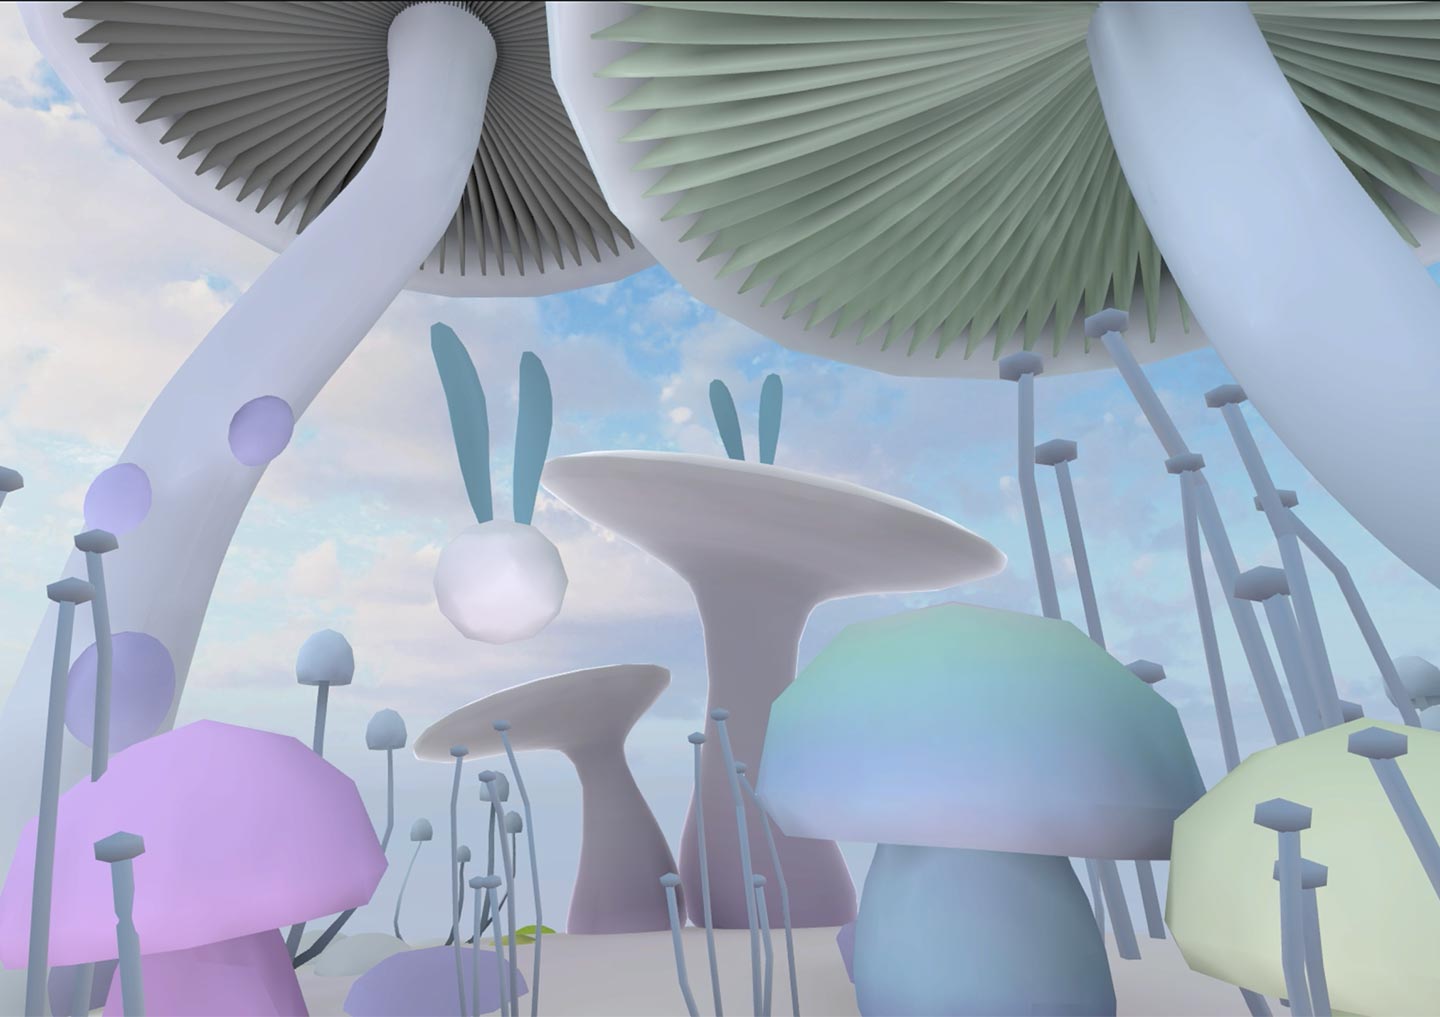 A gamified meditation app, Hana will gift the player various seeds, which they can later plant in a completely customisable garden area within the game